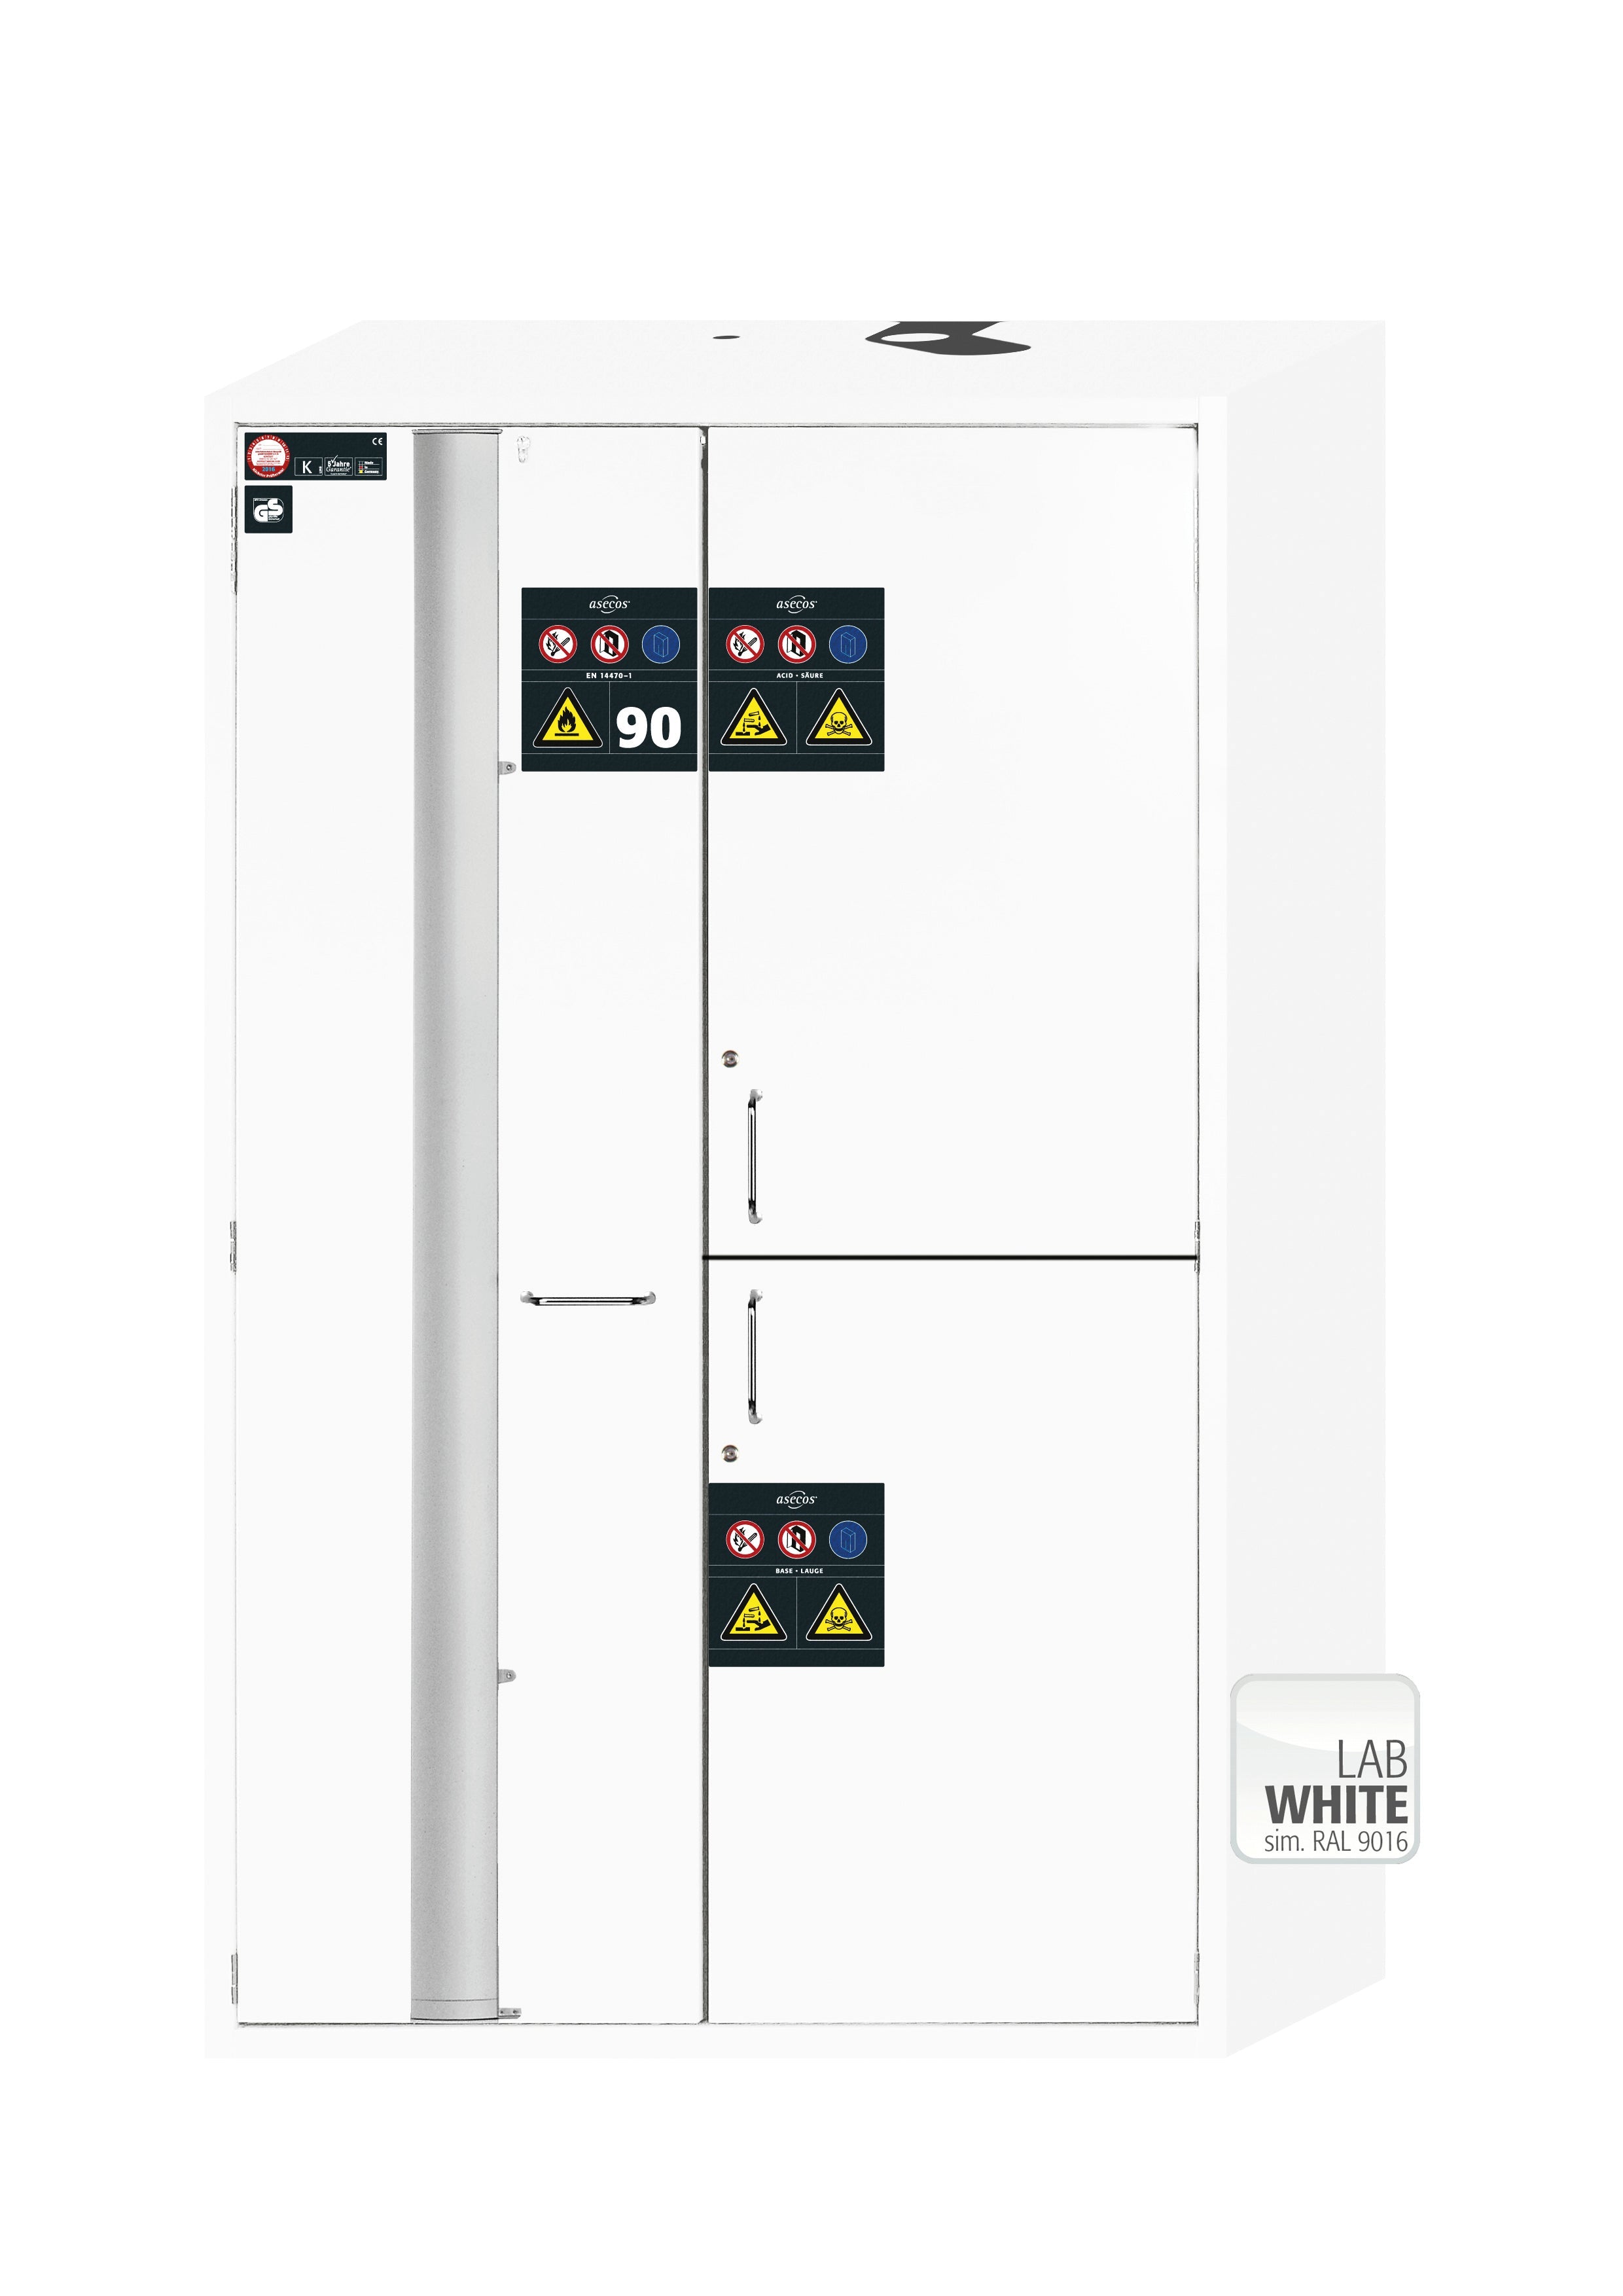 Type 90 combination safety cabinet K-PHOENIX Vol.2-90 model K90.196.120.MC.FWAC in laboratory white (similar to RAL 9016) with 4x standard pull-out tray (stainless steel 1.4301)